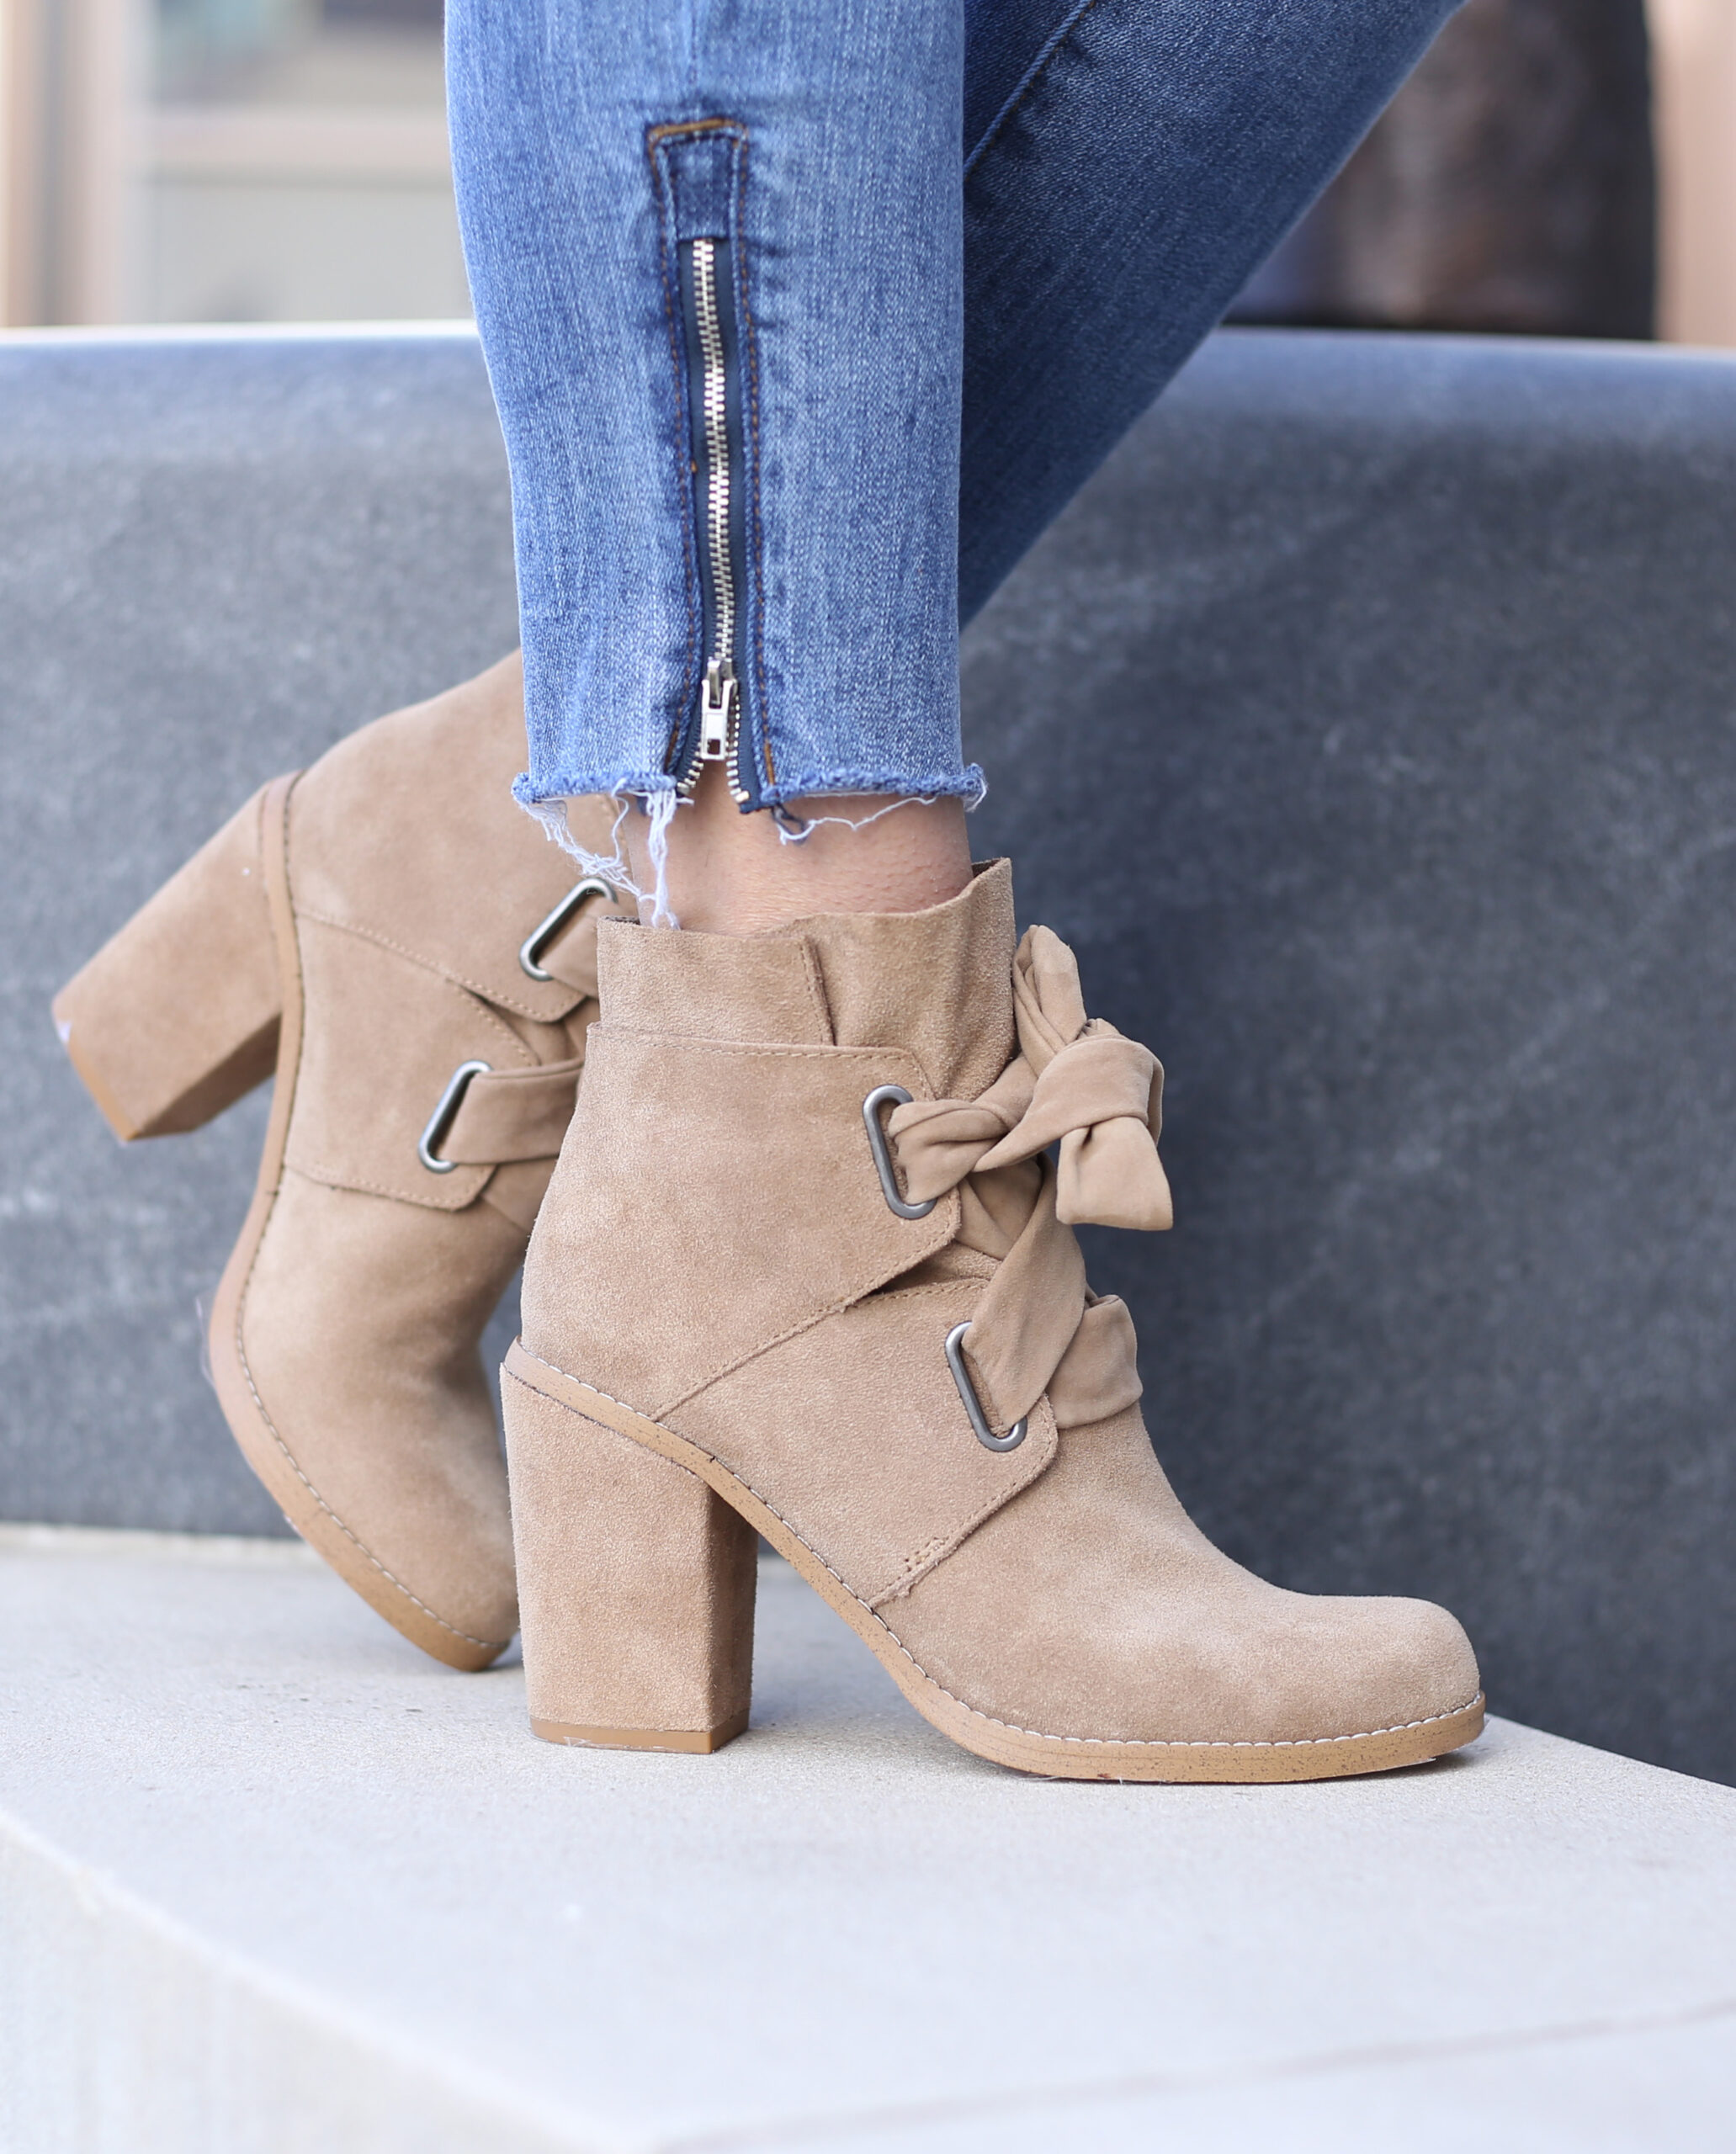 anna monteiro of blushing rose style wearing fall booties , lace up taupe booties, block heel booties